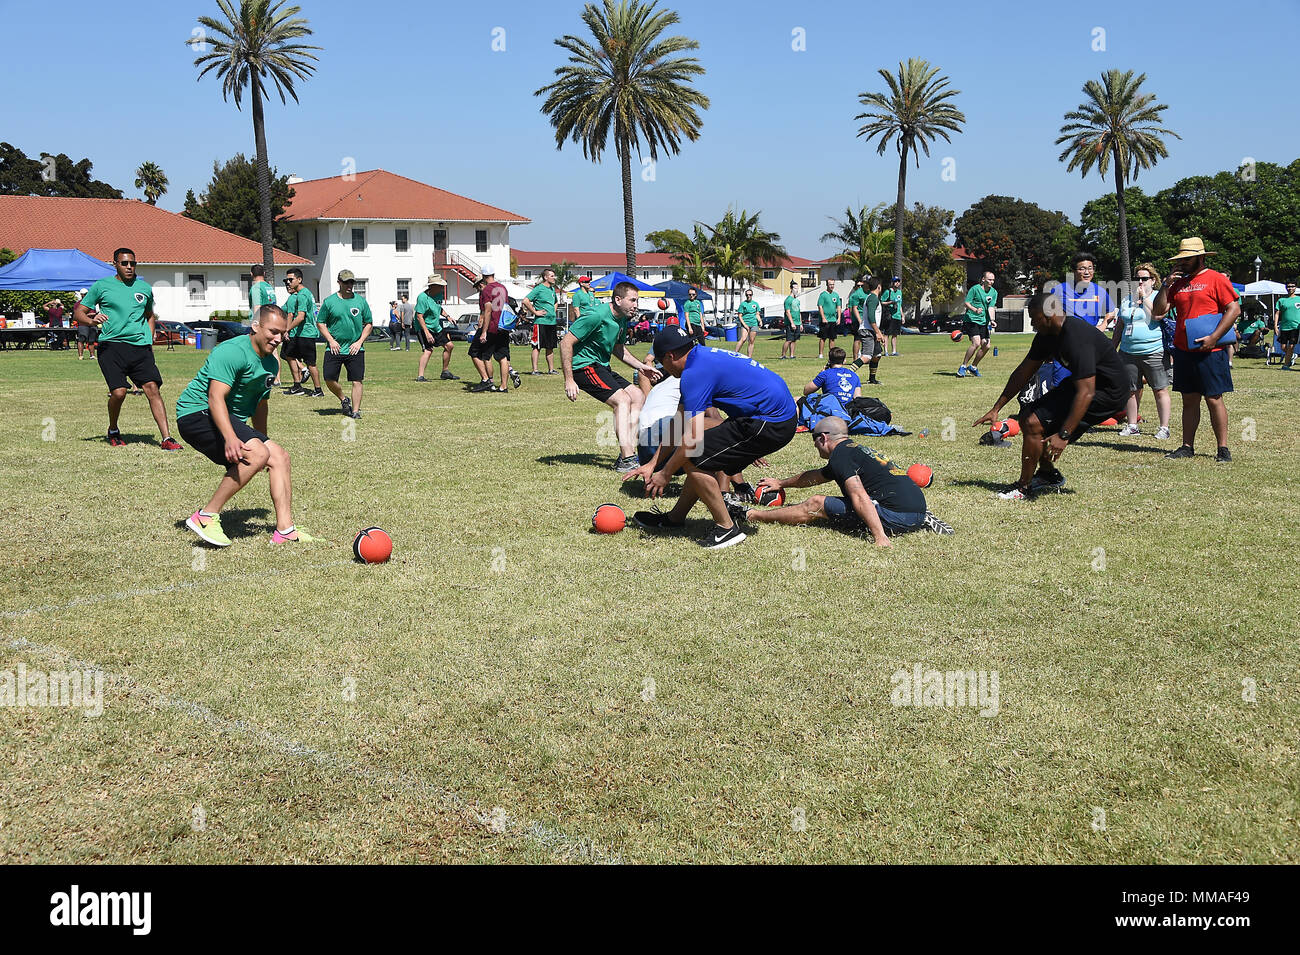 Military and Air Force civilian employees at Los Angeles Air Force Base, 61st Air Base Group and Space and Missile Systems Center, Calif., gather at the Fort MacArthur parade field in San Pedro, Calif. Oct. 4, 2016, to participate in “Sports Day” for spirited squadron and inter-directorate competition in a variety of sports venues. The games foster physical, mental, and spiritual health and well-being, and a chance to win over-all points for the unit trophy, not to mention bragging rights between the SMC Directorates and 61st ABG. Lt Gen John Thompson, Space and Missile Systems Center, Directo Stock Photo